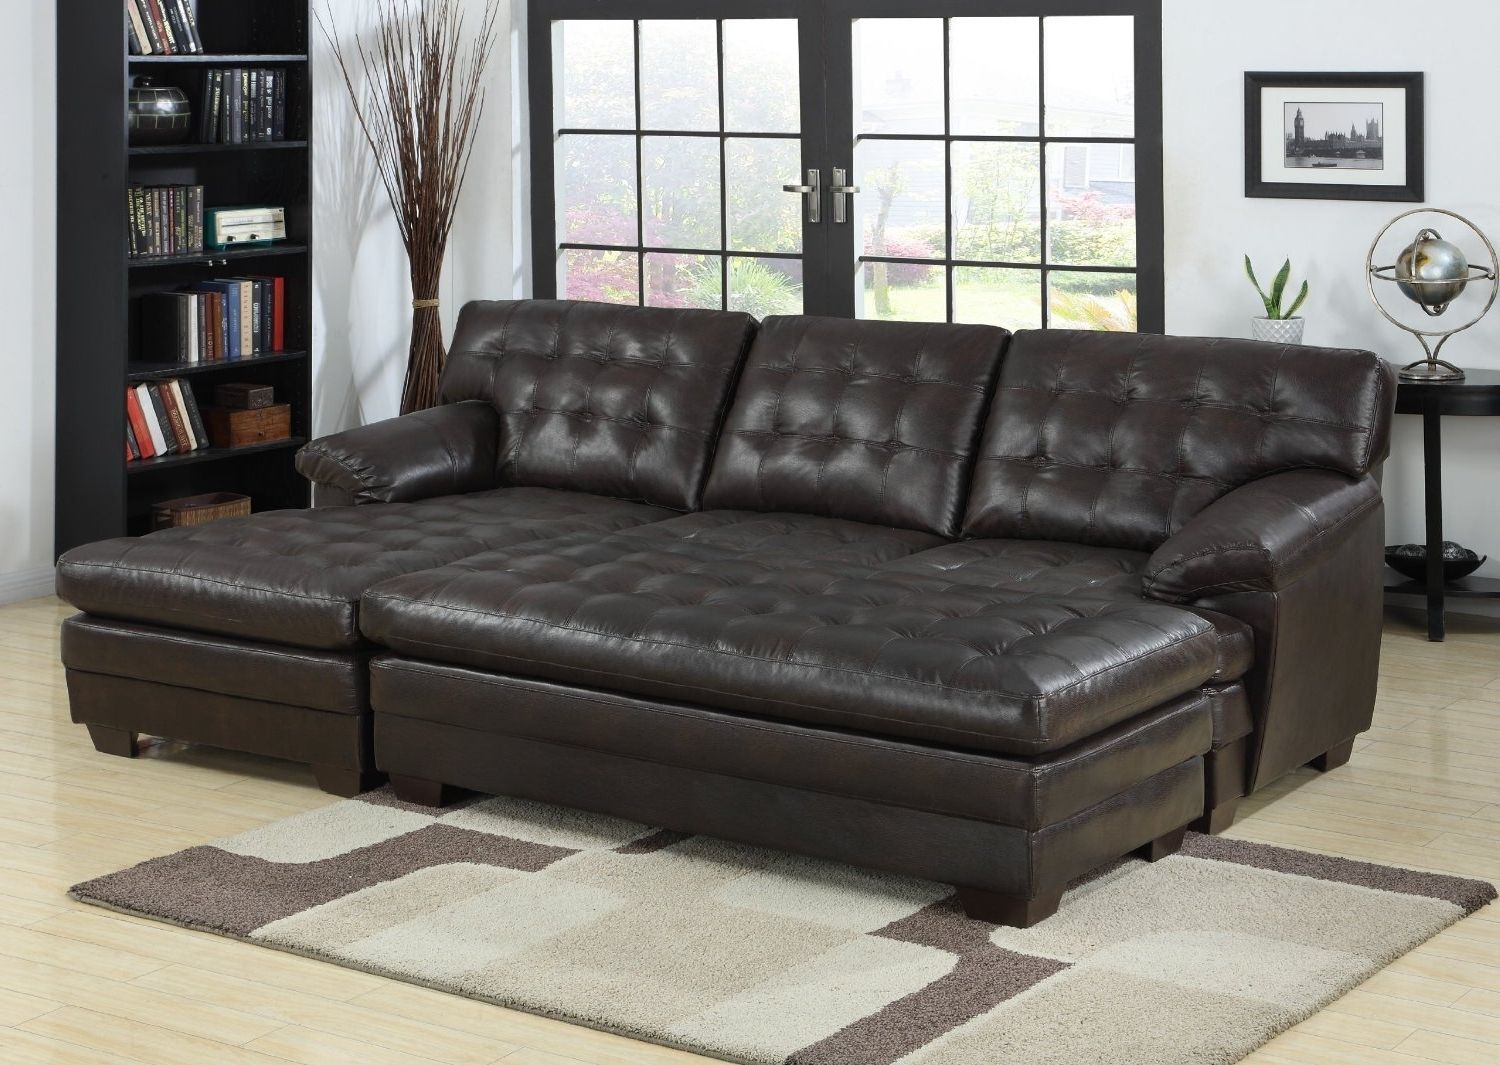 Most Recent Ethan Allen Sectional Sofas Double Chaise Sectional U Shaped Inside Sectional Sofas With Chaise Lounge (Photo 12 of 15)